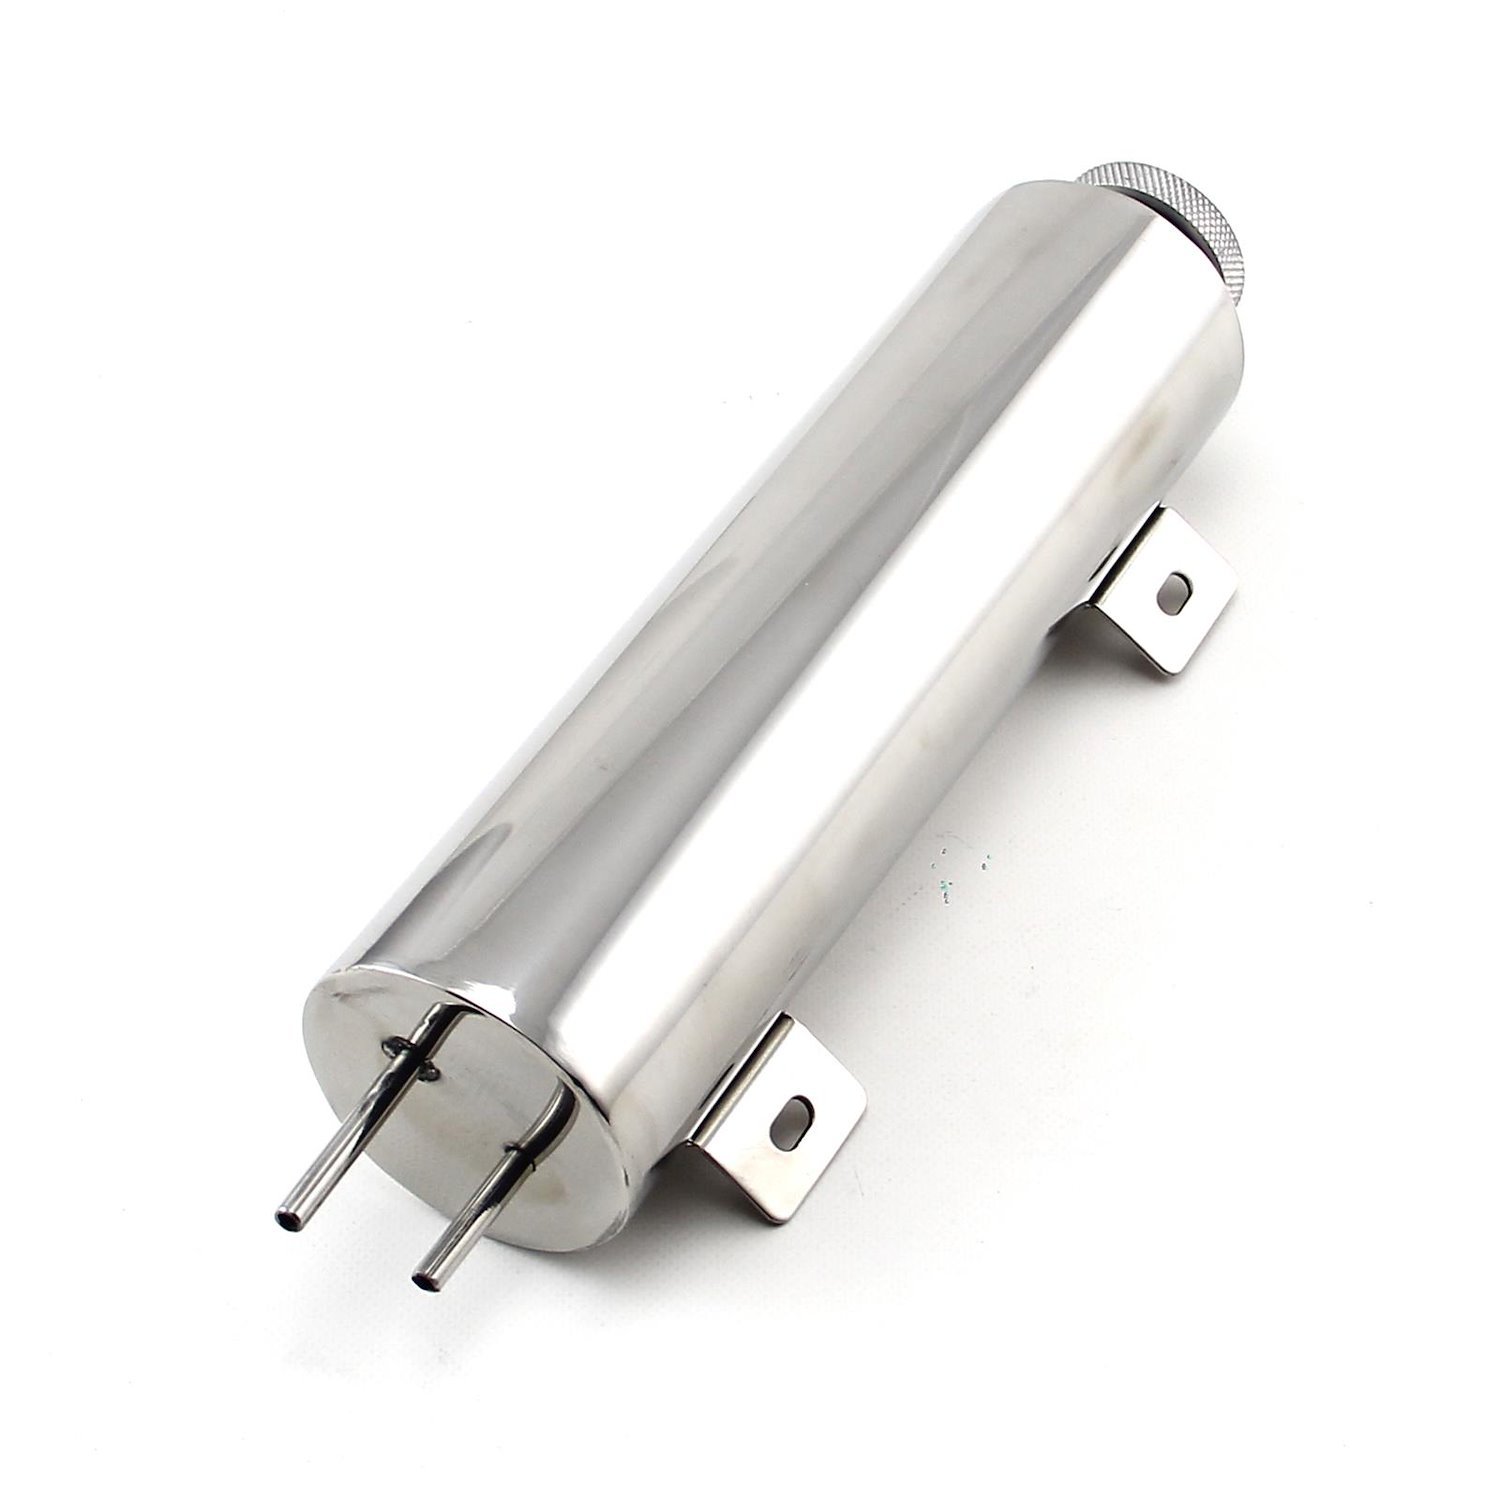 3 x 13 Stainless Steel Overflow Tank With Mounting Bracket Kit